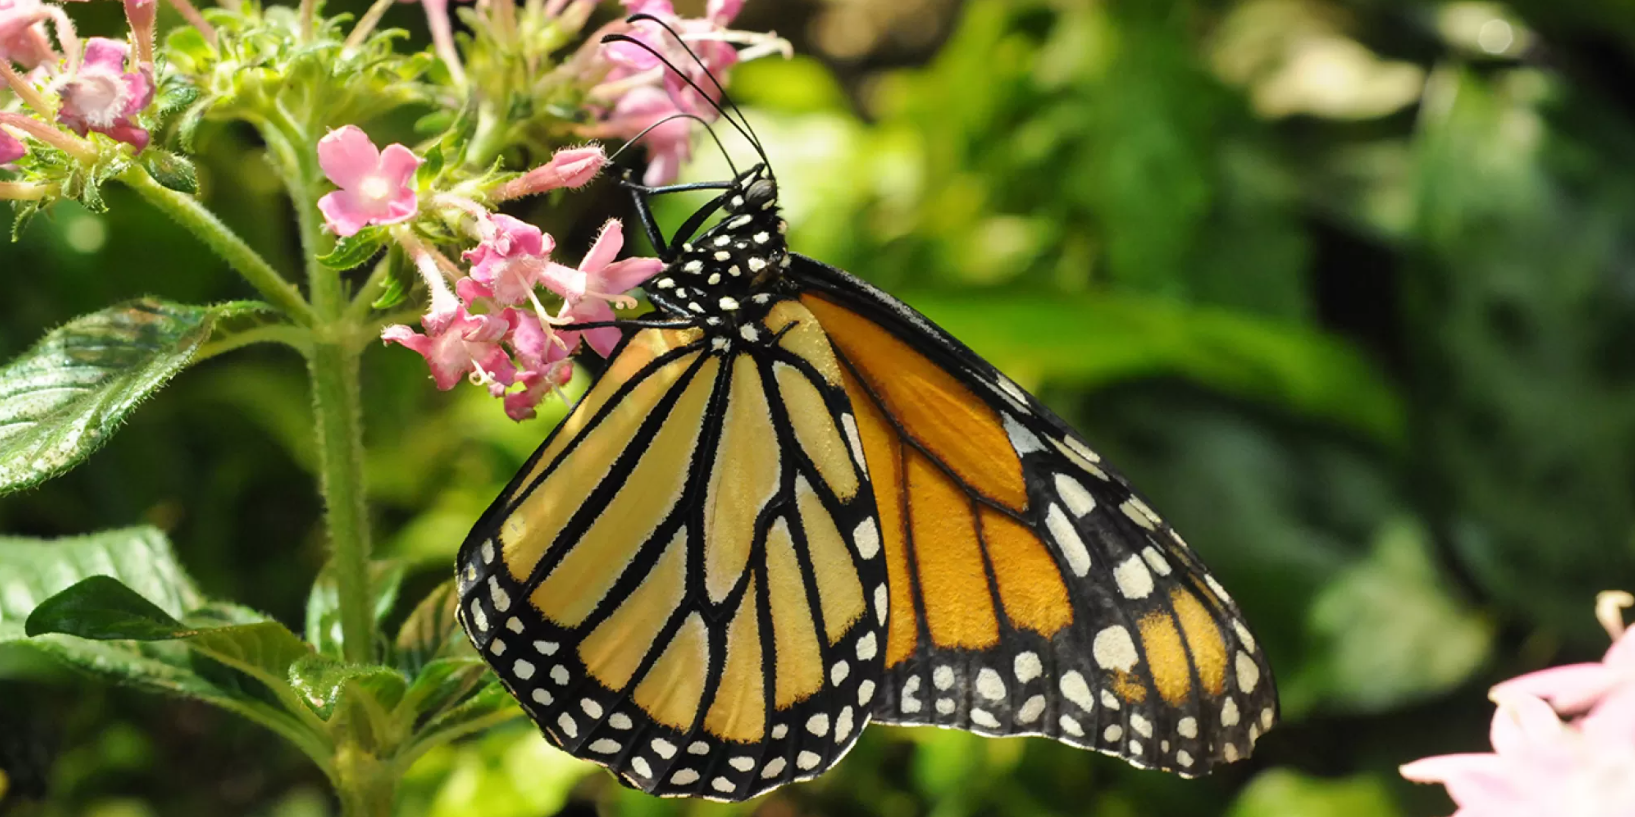 A close-up of a Monarch butterfly pollinating a flower.